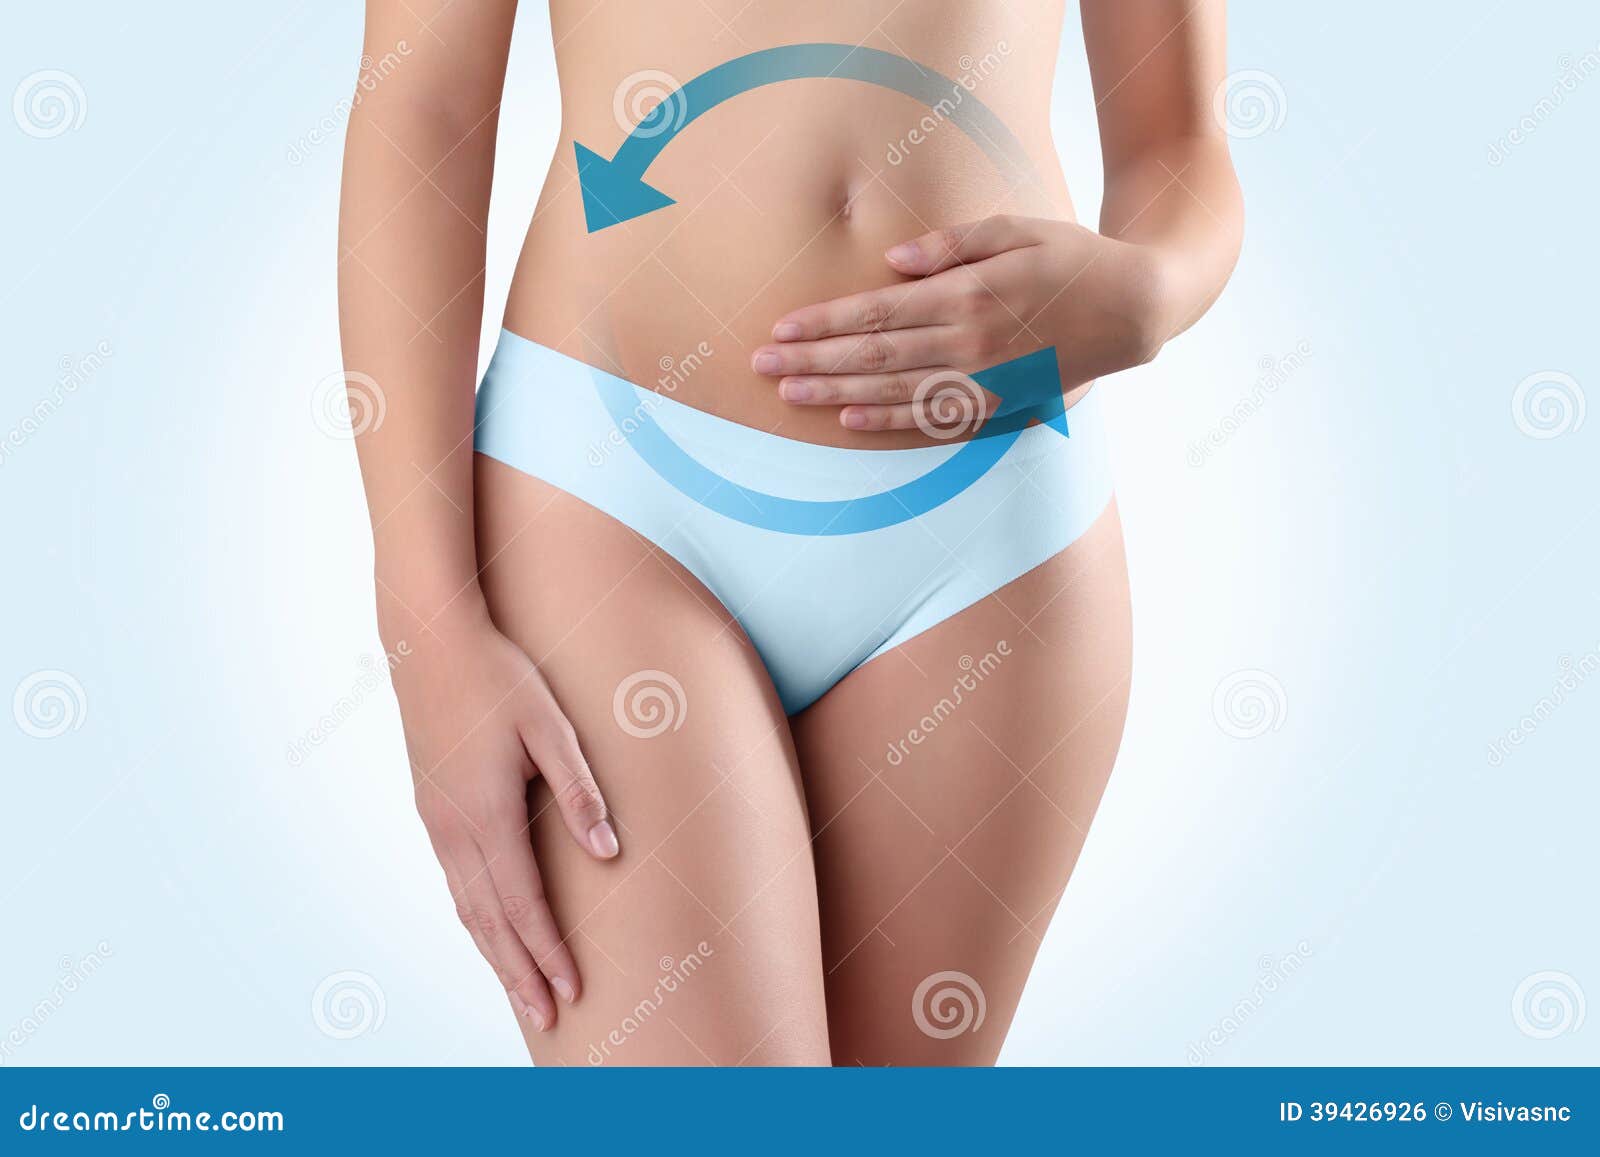 woman hands on belly with blue arrow